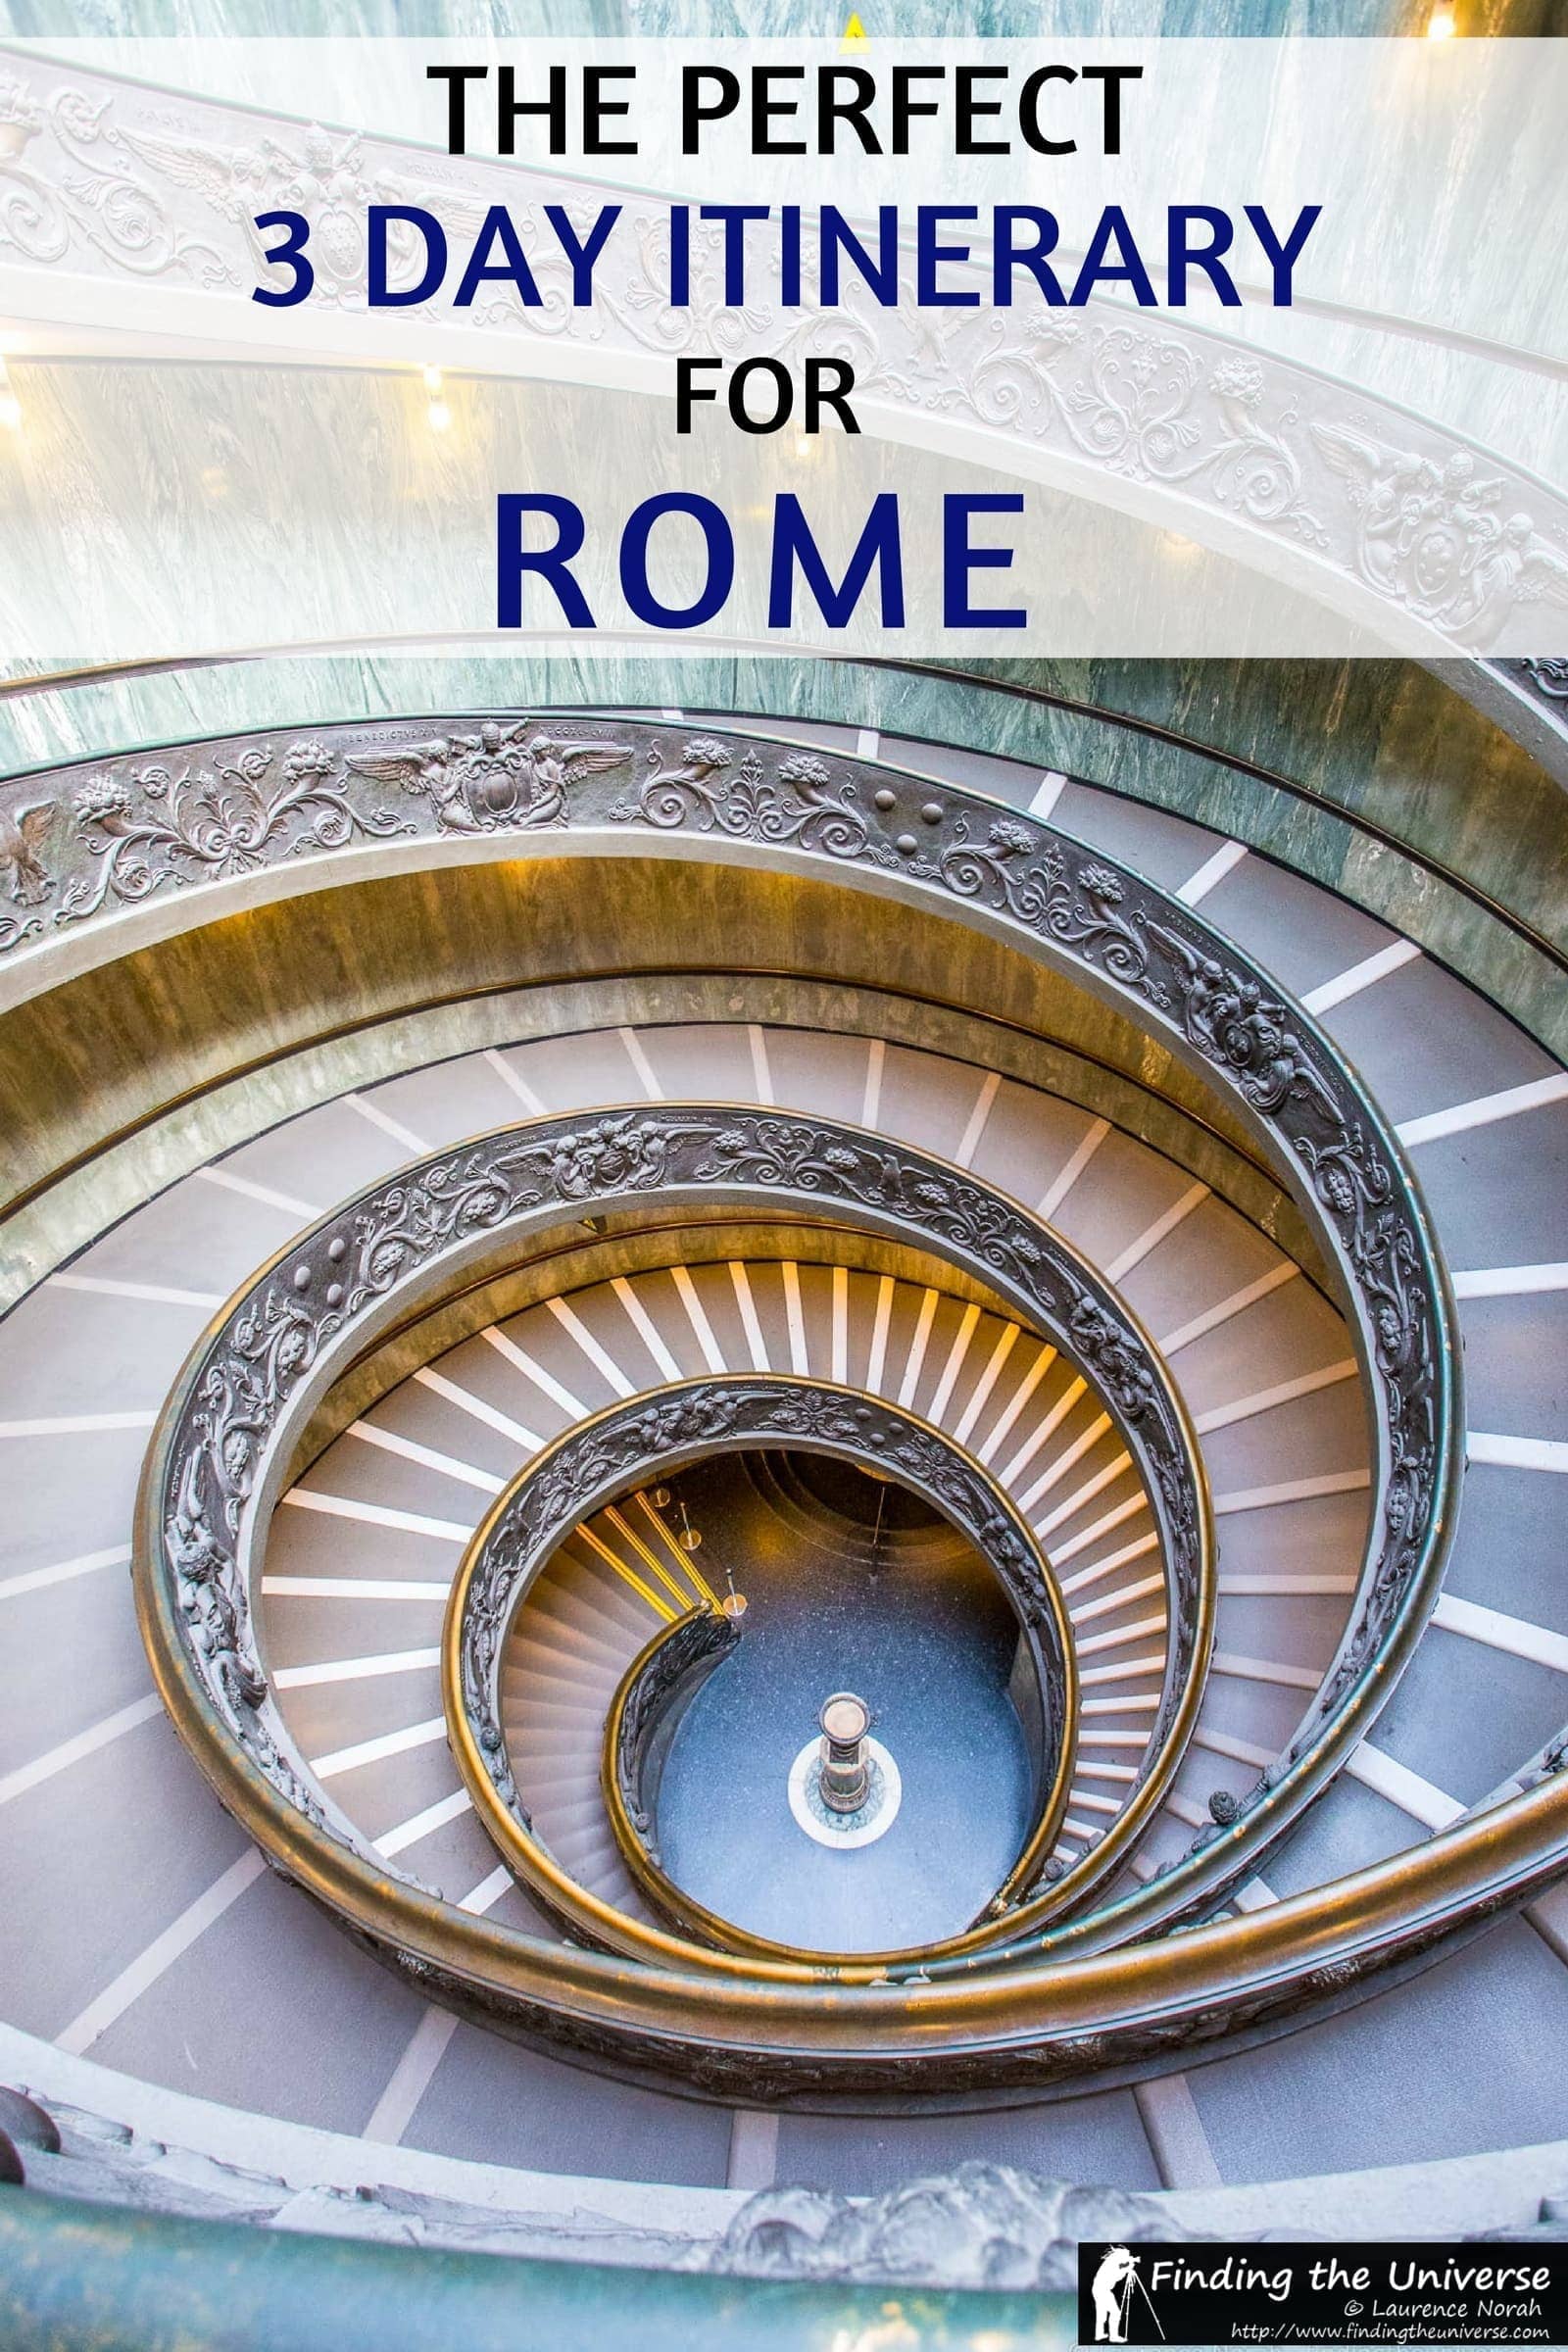 An itinerary for the perfect 3 Days in Rome. Everything from what all the highlights you need to see, to when to visit, where to stay, and tips on saving money in Rome!